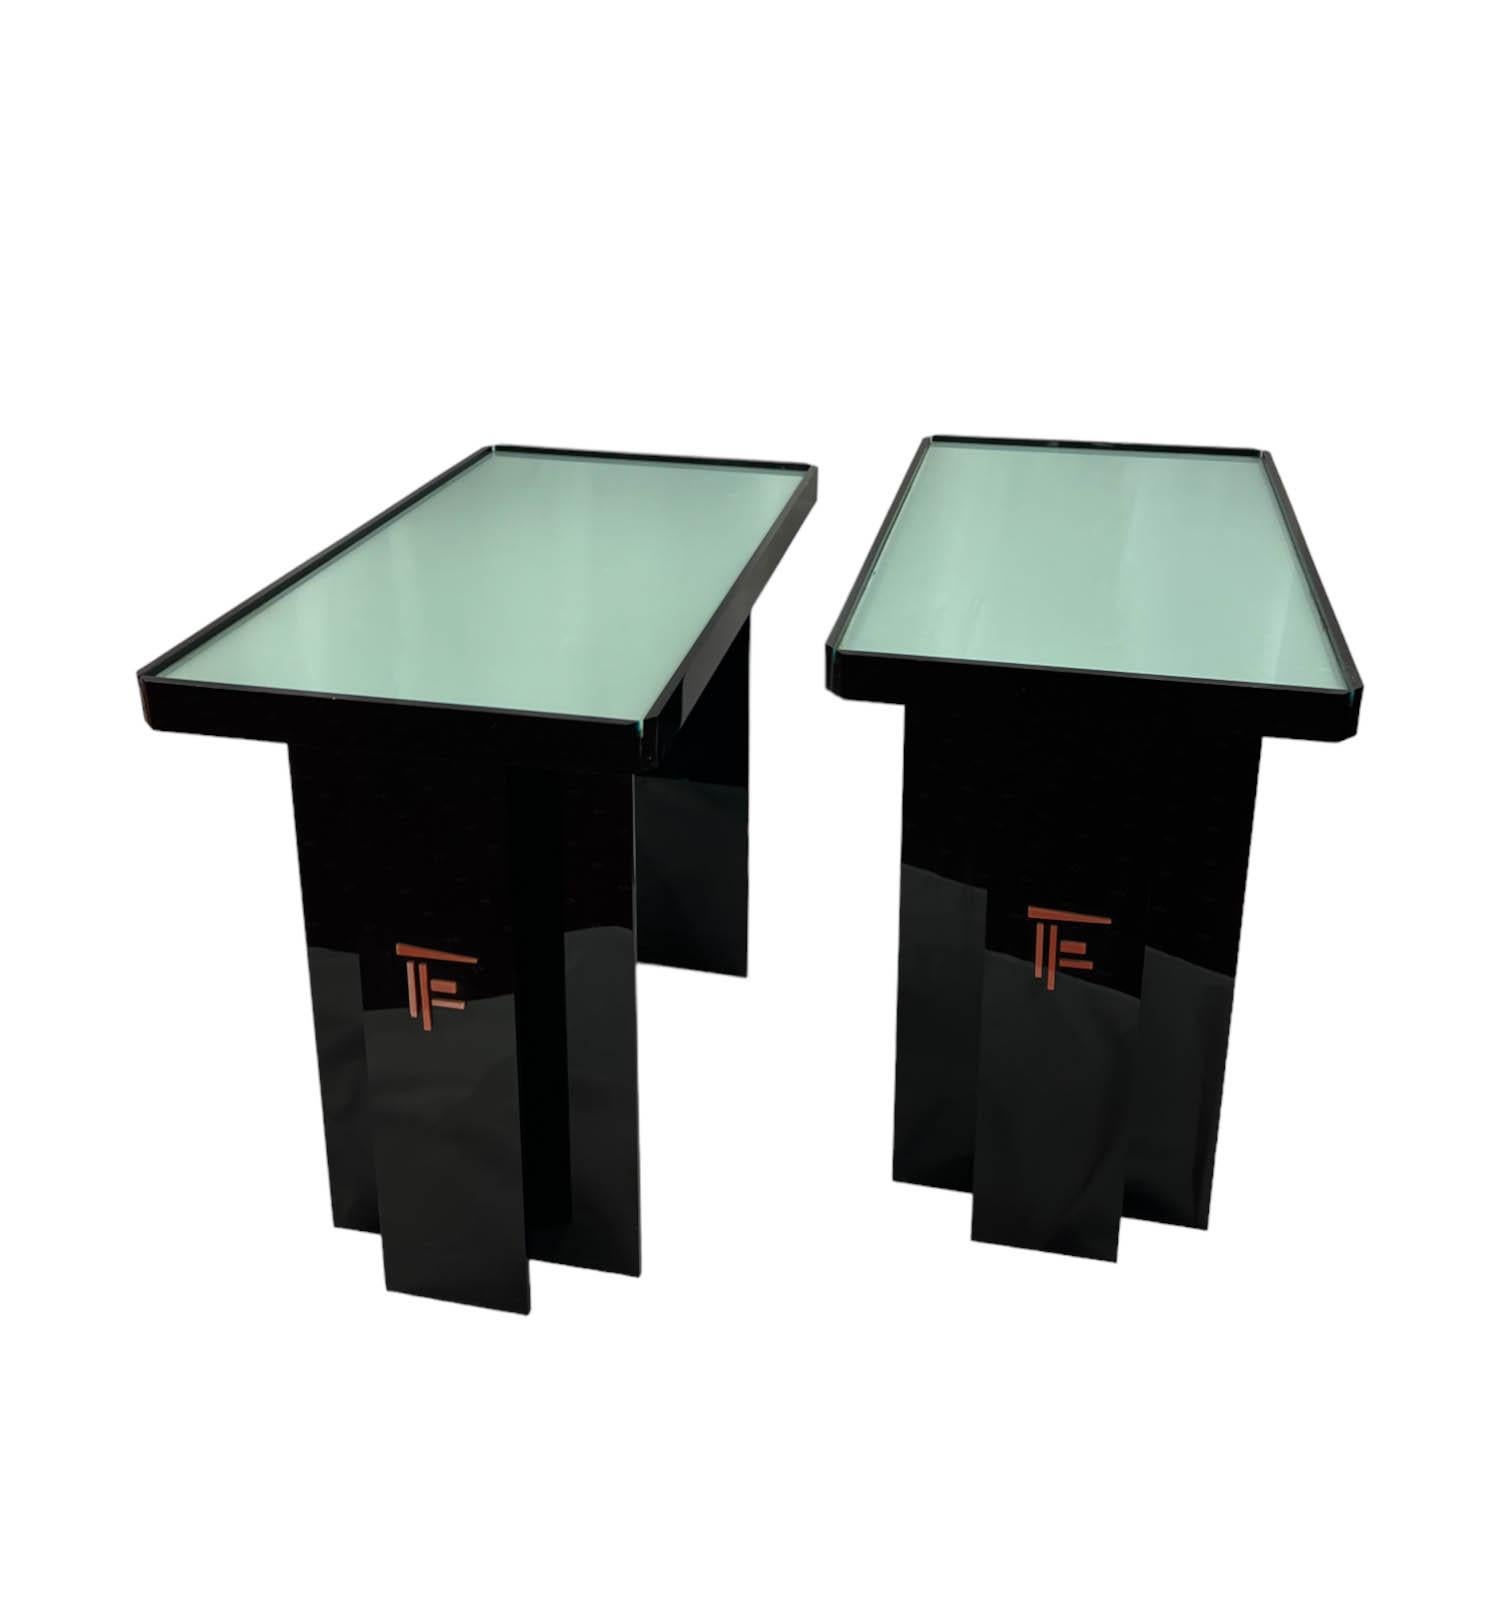 North American Vintage Pair of Japanese Style Accent/Side Tables With Glass Top